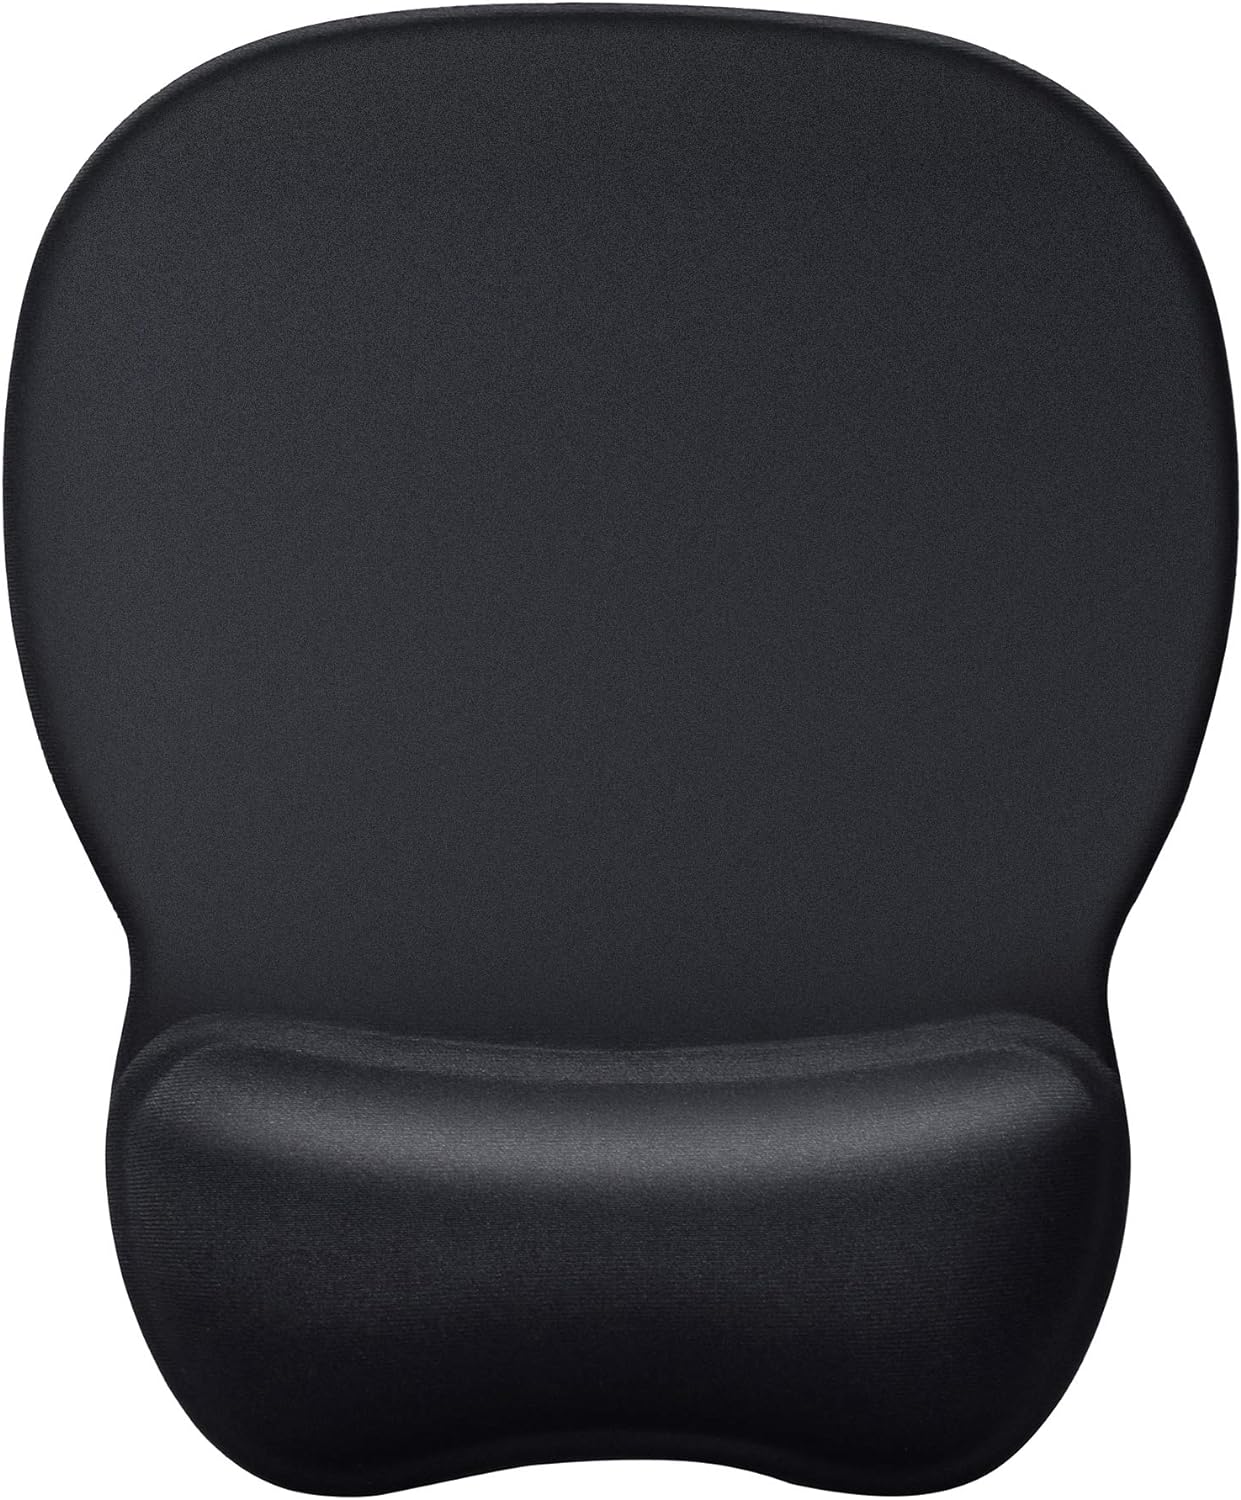 MROCO Ergonomic Mouse Pad with Gel Wrist Support, Comfortable Mousepad with Smooth Wrist Rest Surface and Non-Slip PU Base for Pain Relief, Computer, Laptop, Office & Home, 9.4 x 8.1 in, Black